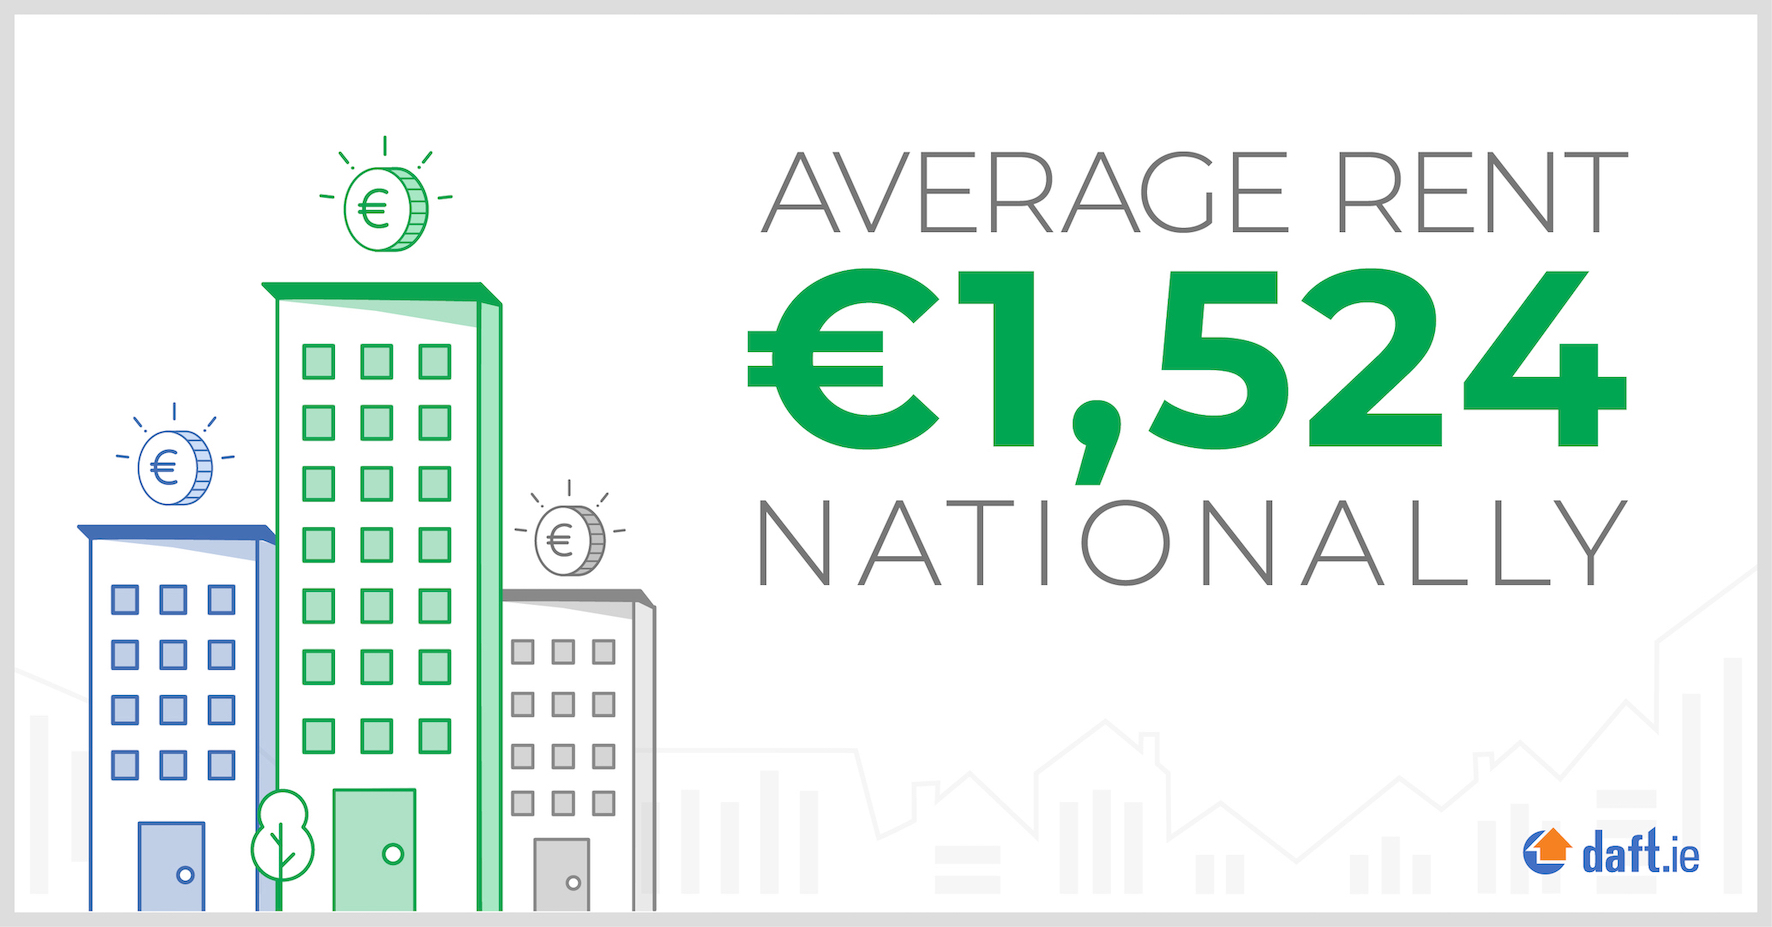 Average rent nationally in Q4 2021